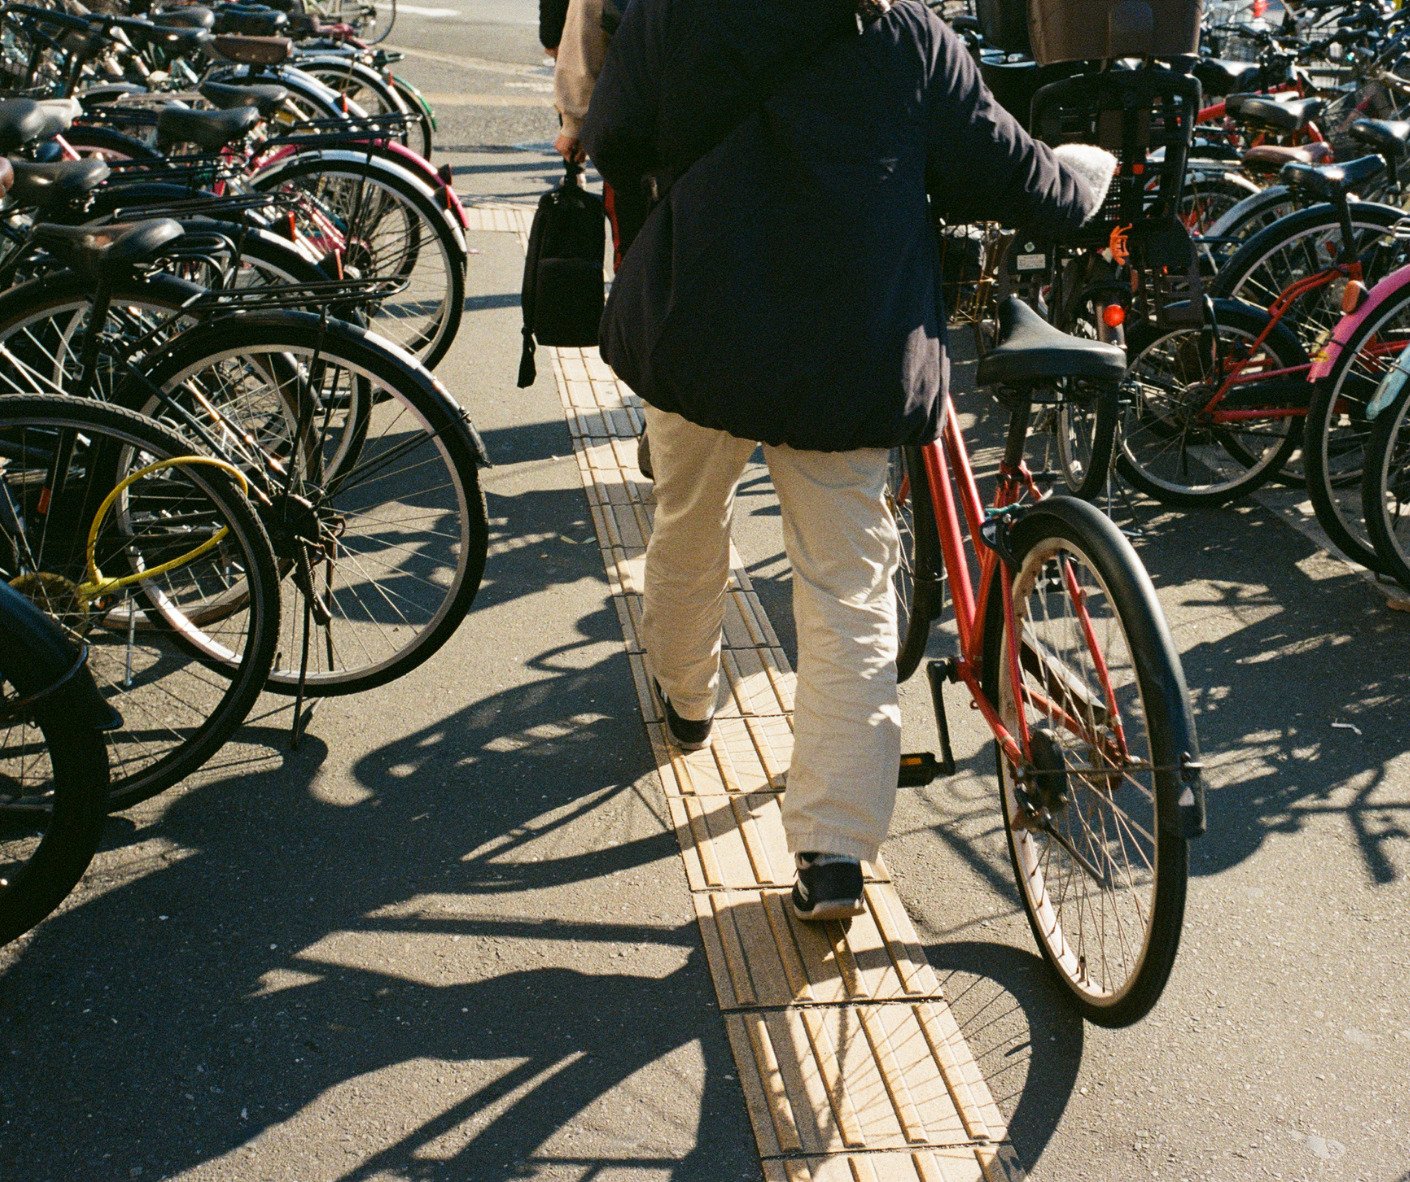 Buying and registering a used bicycle in Japan